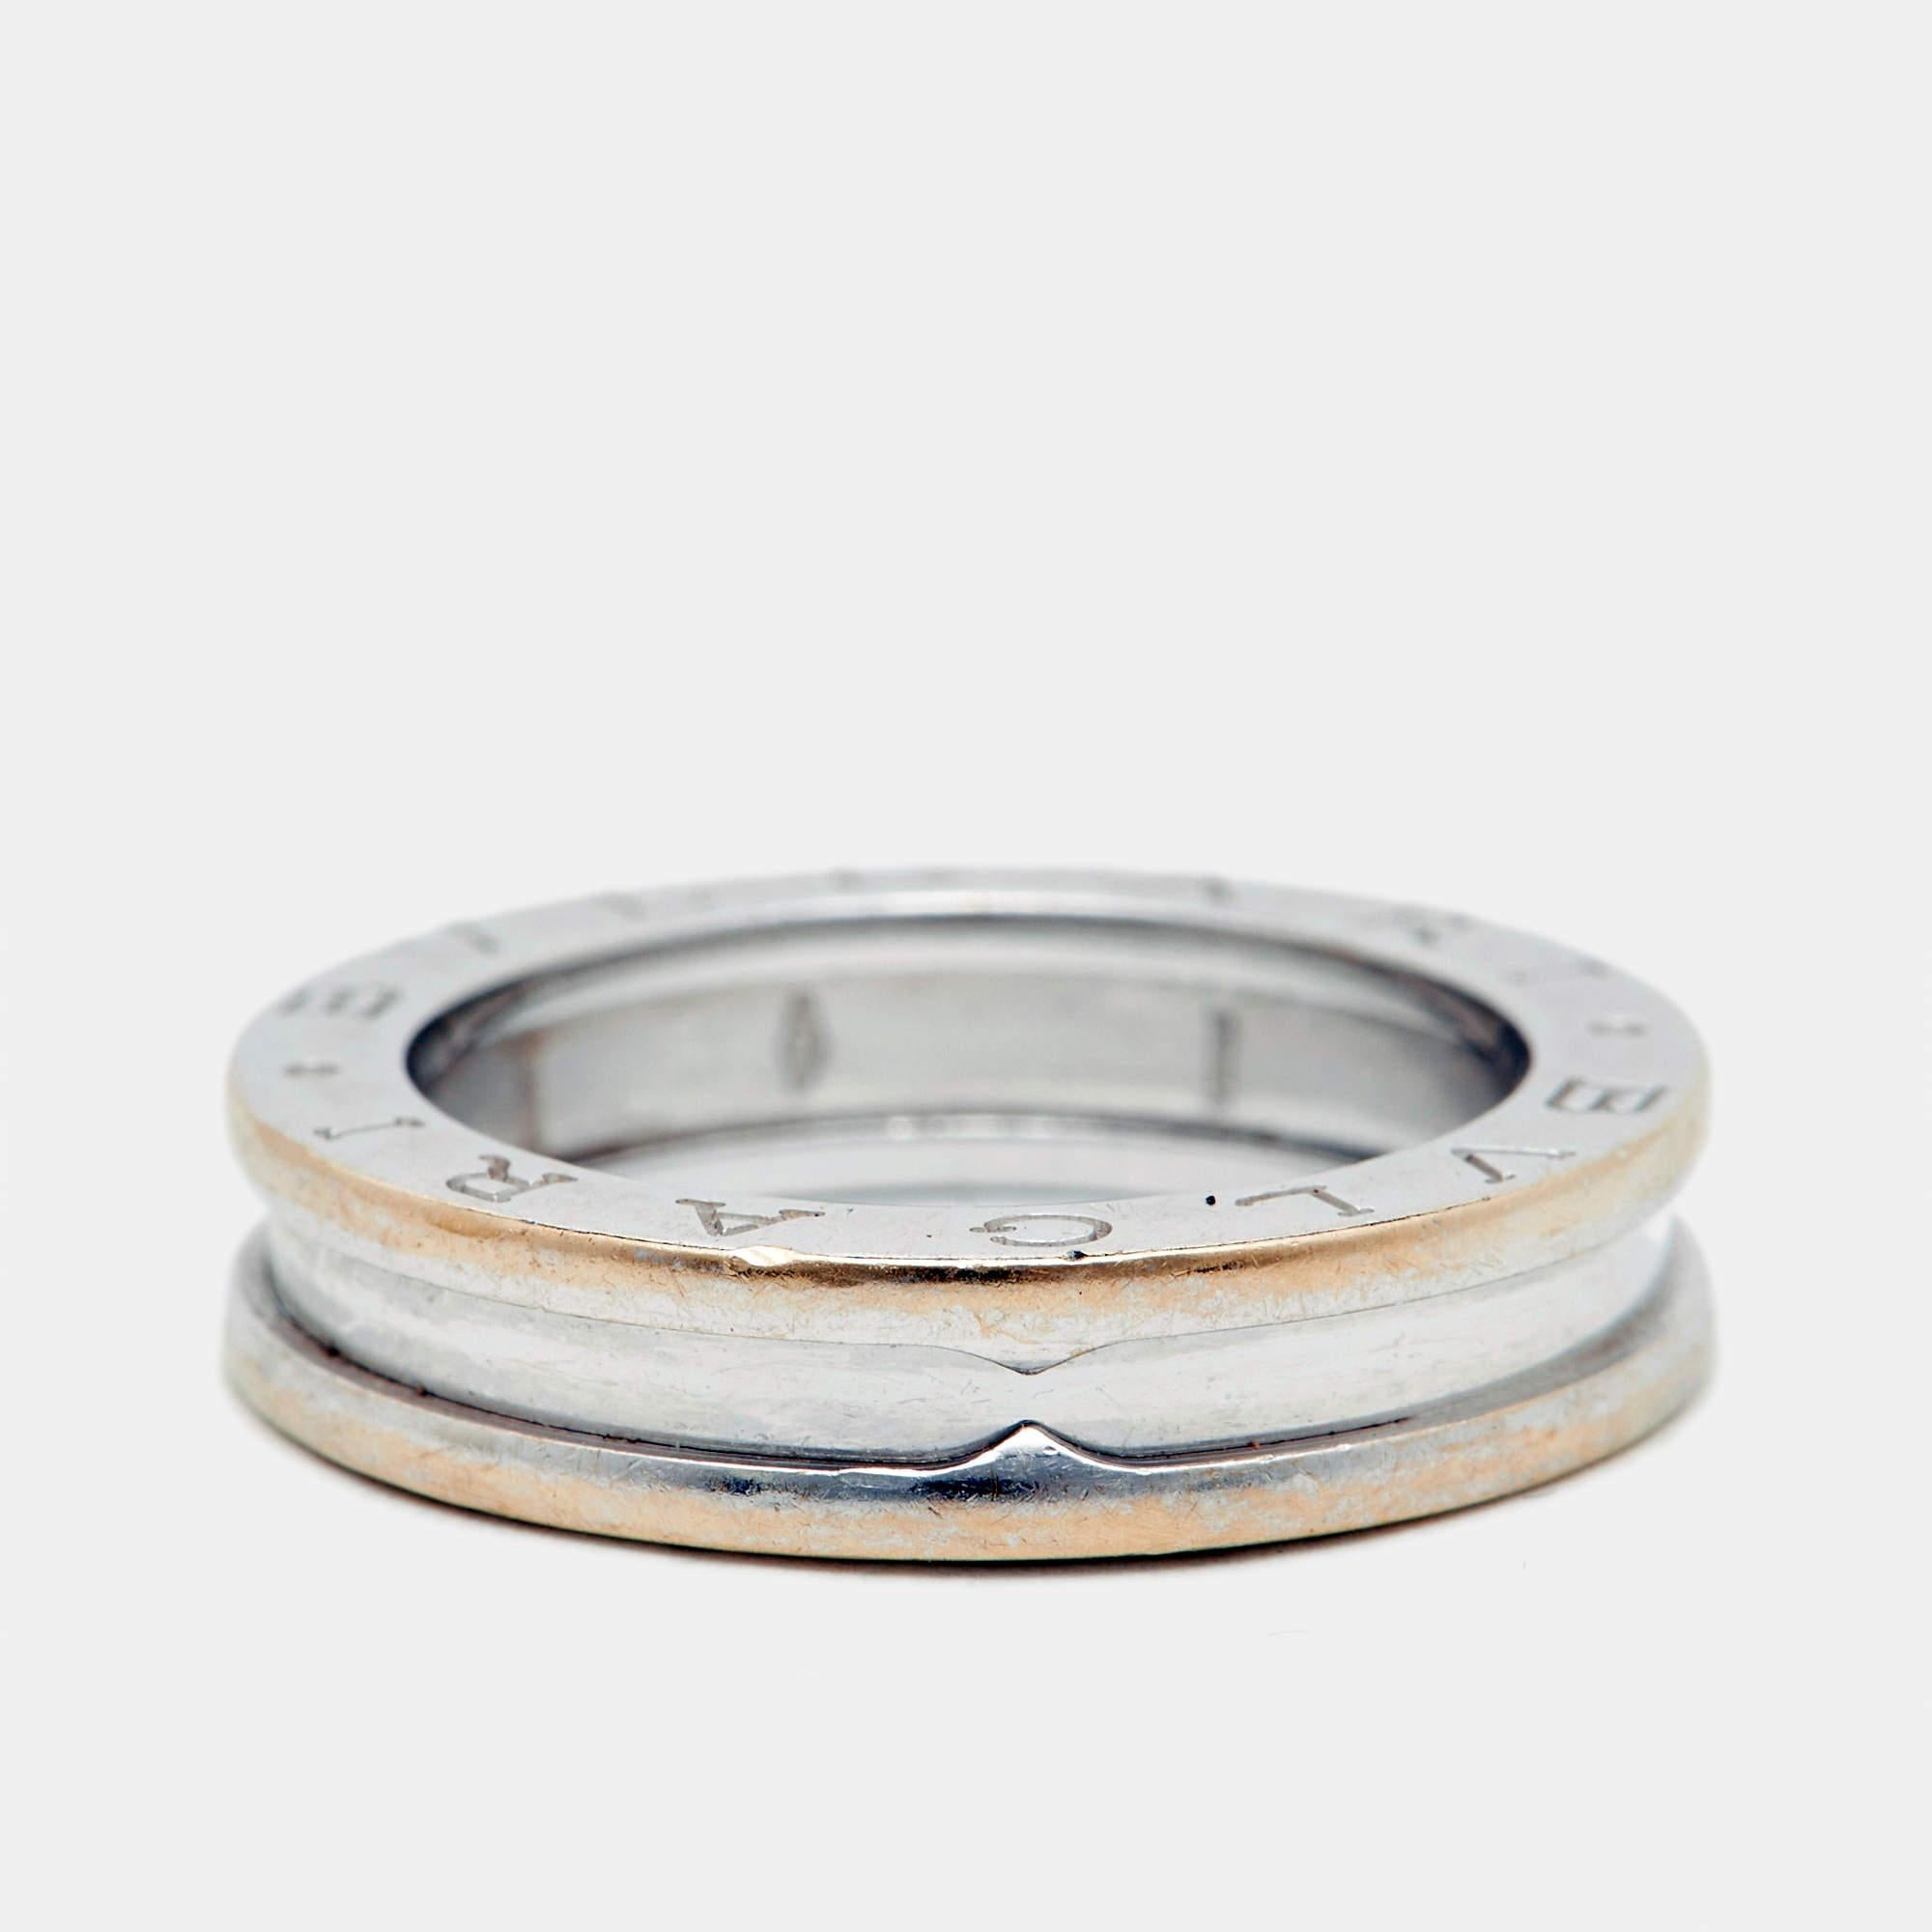 Unique and modern, this charming B.Zero1 ring is from one of Bvlgari's iconic collections. Inspired by the Colosseum, this ring merges exceptional creative vision and brilliant craftsmanship.

Includes
Original Case